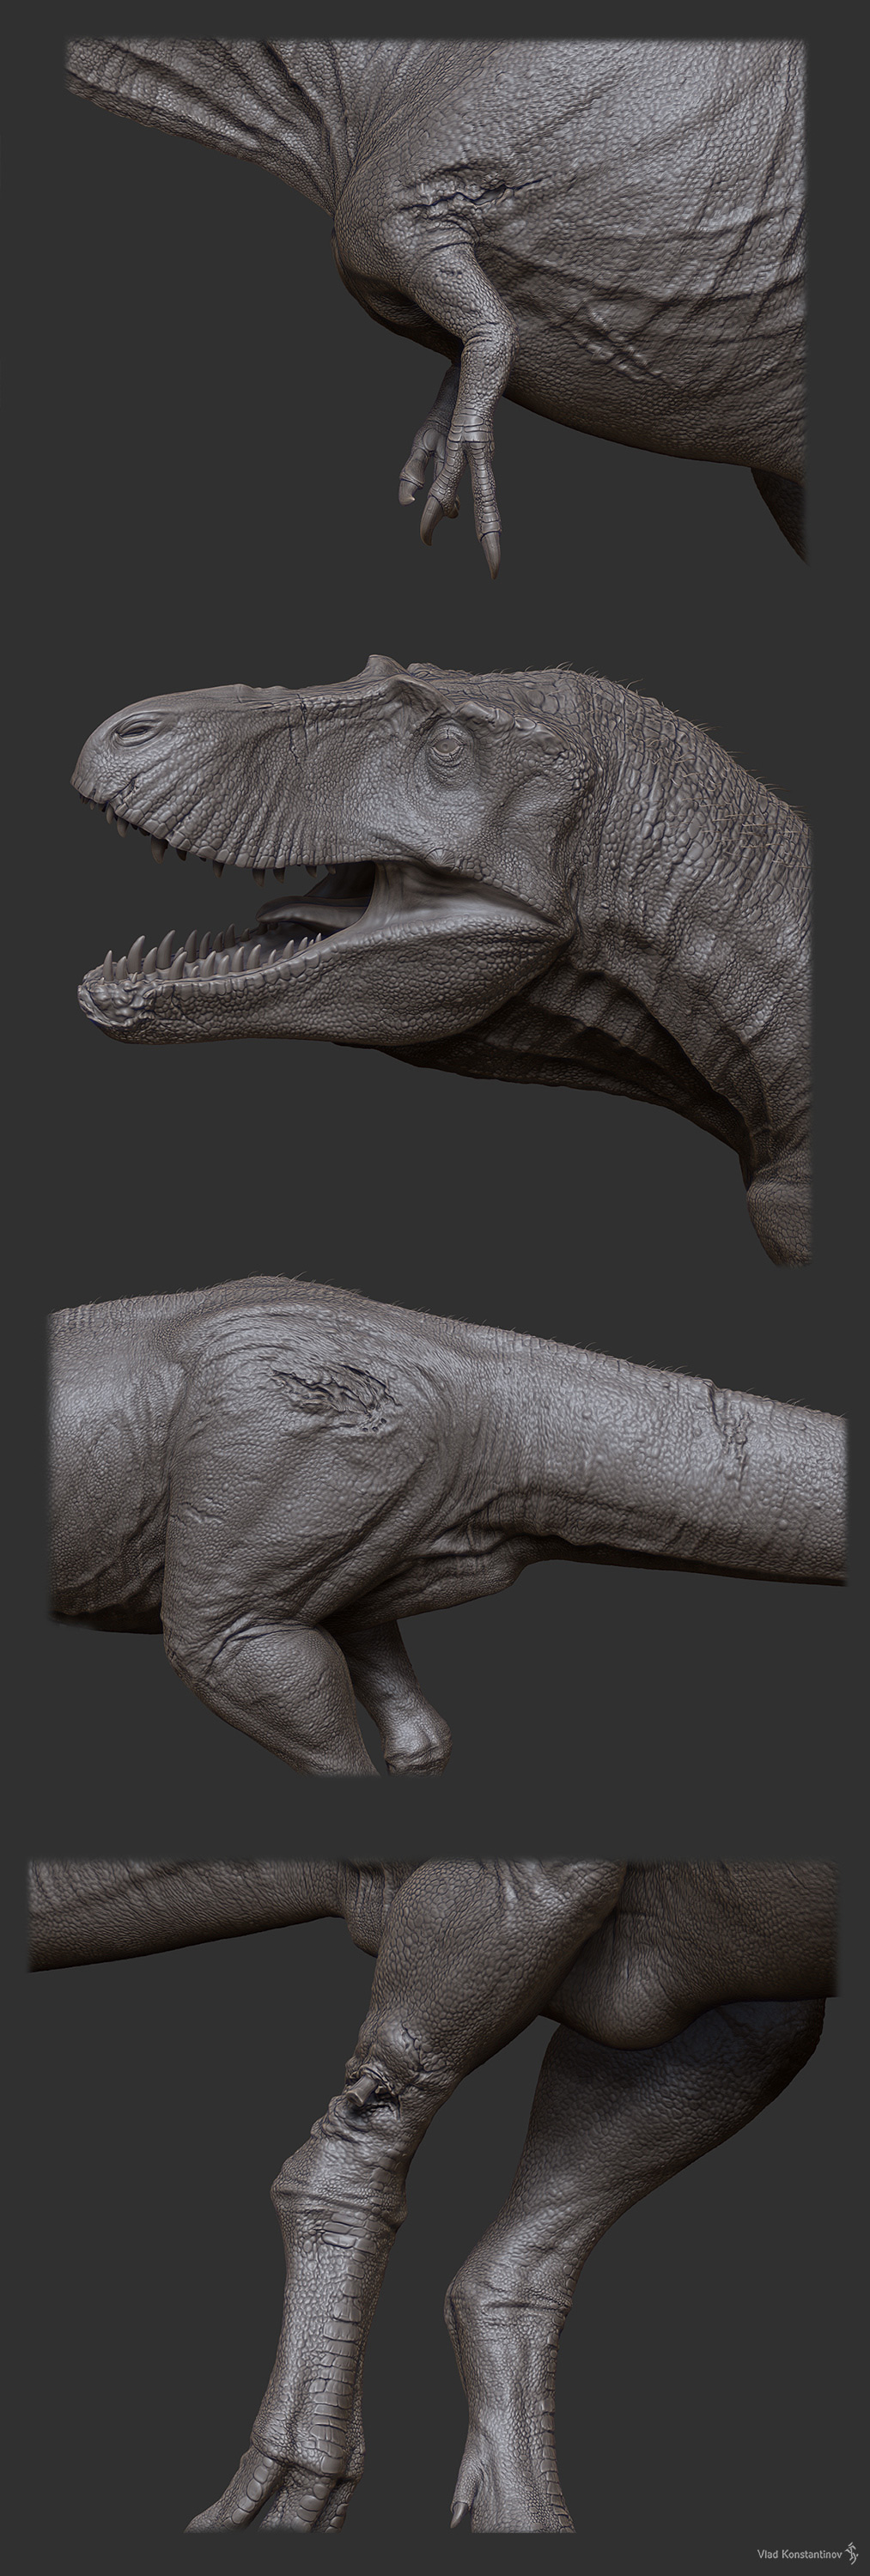 T-Rex 3D Print from the Game Primal Carnage  Primal carnage, Prehistoric  creatures, Dinosaur images